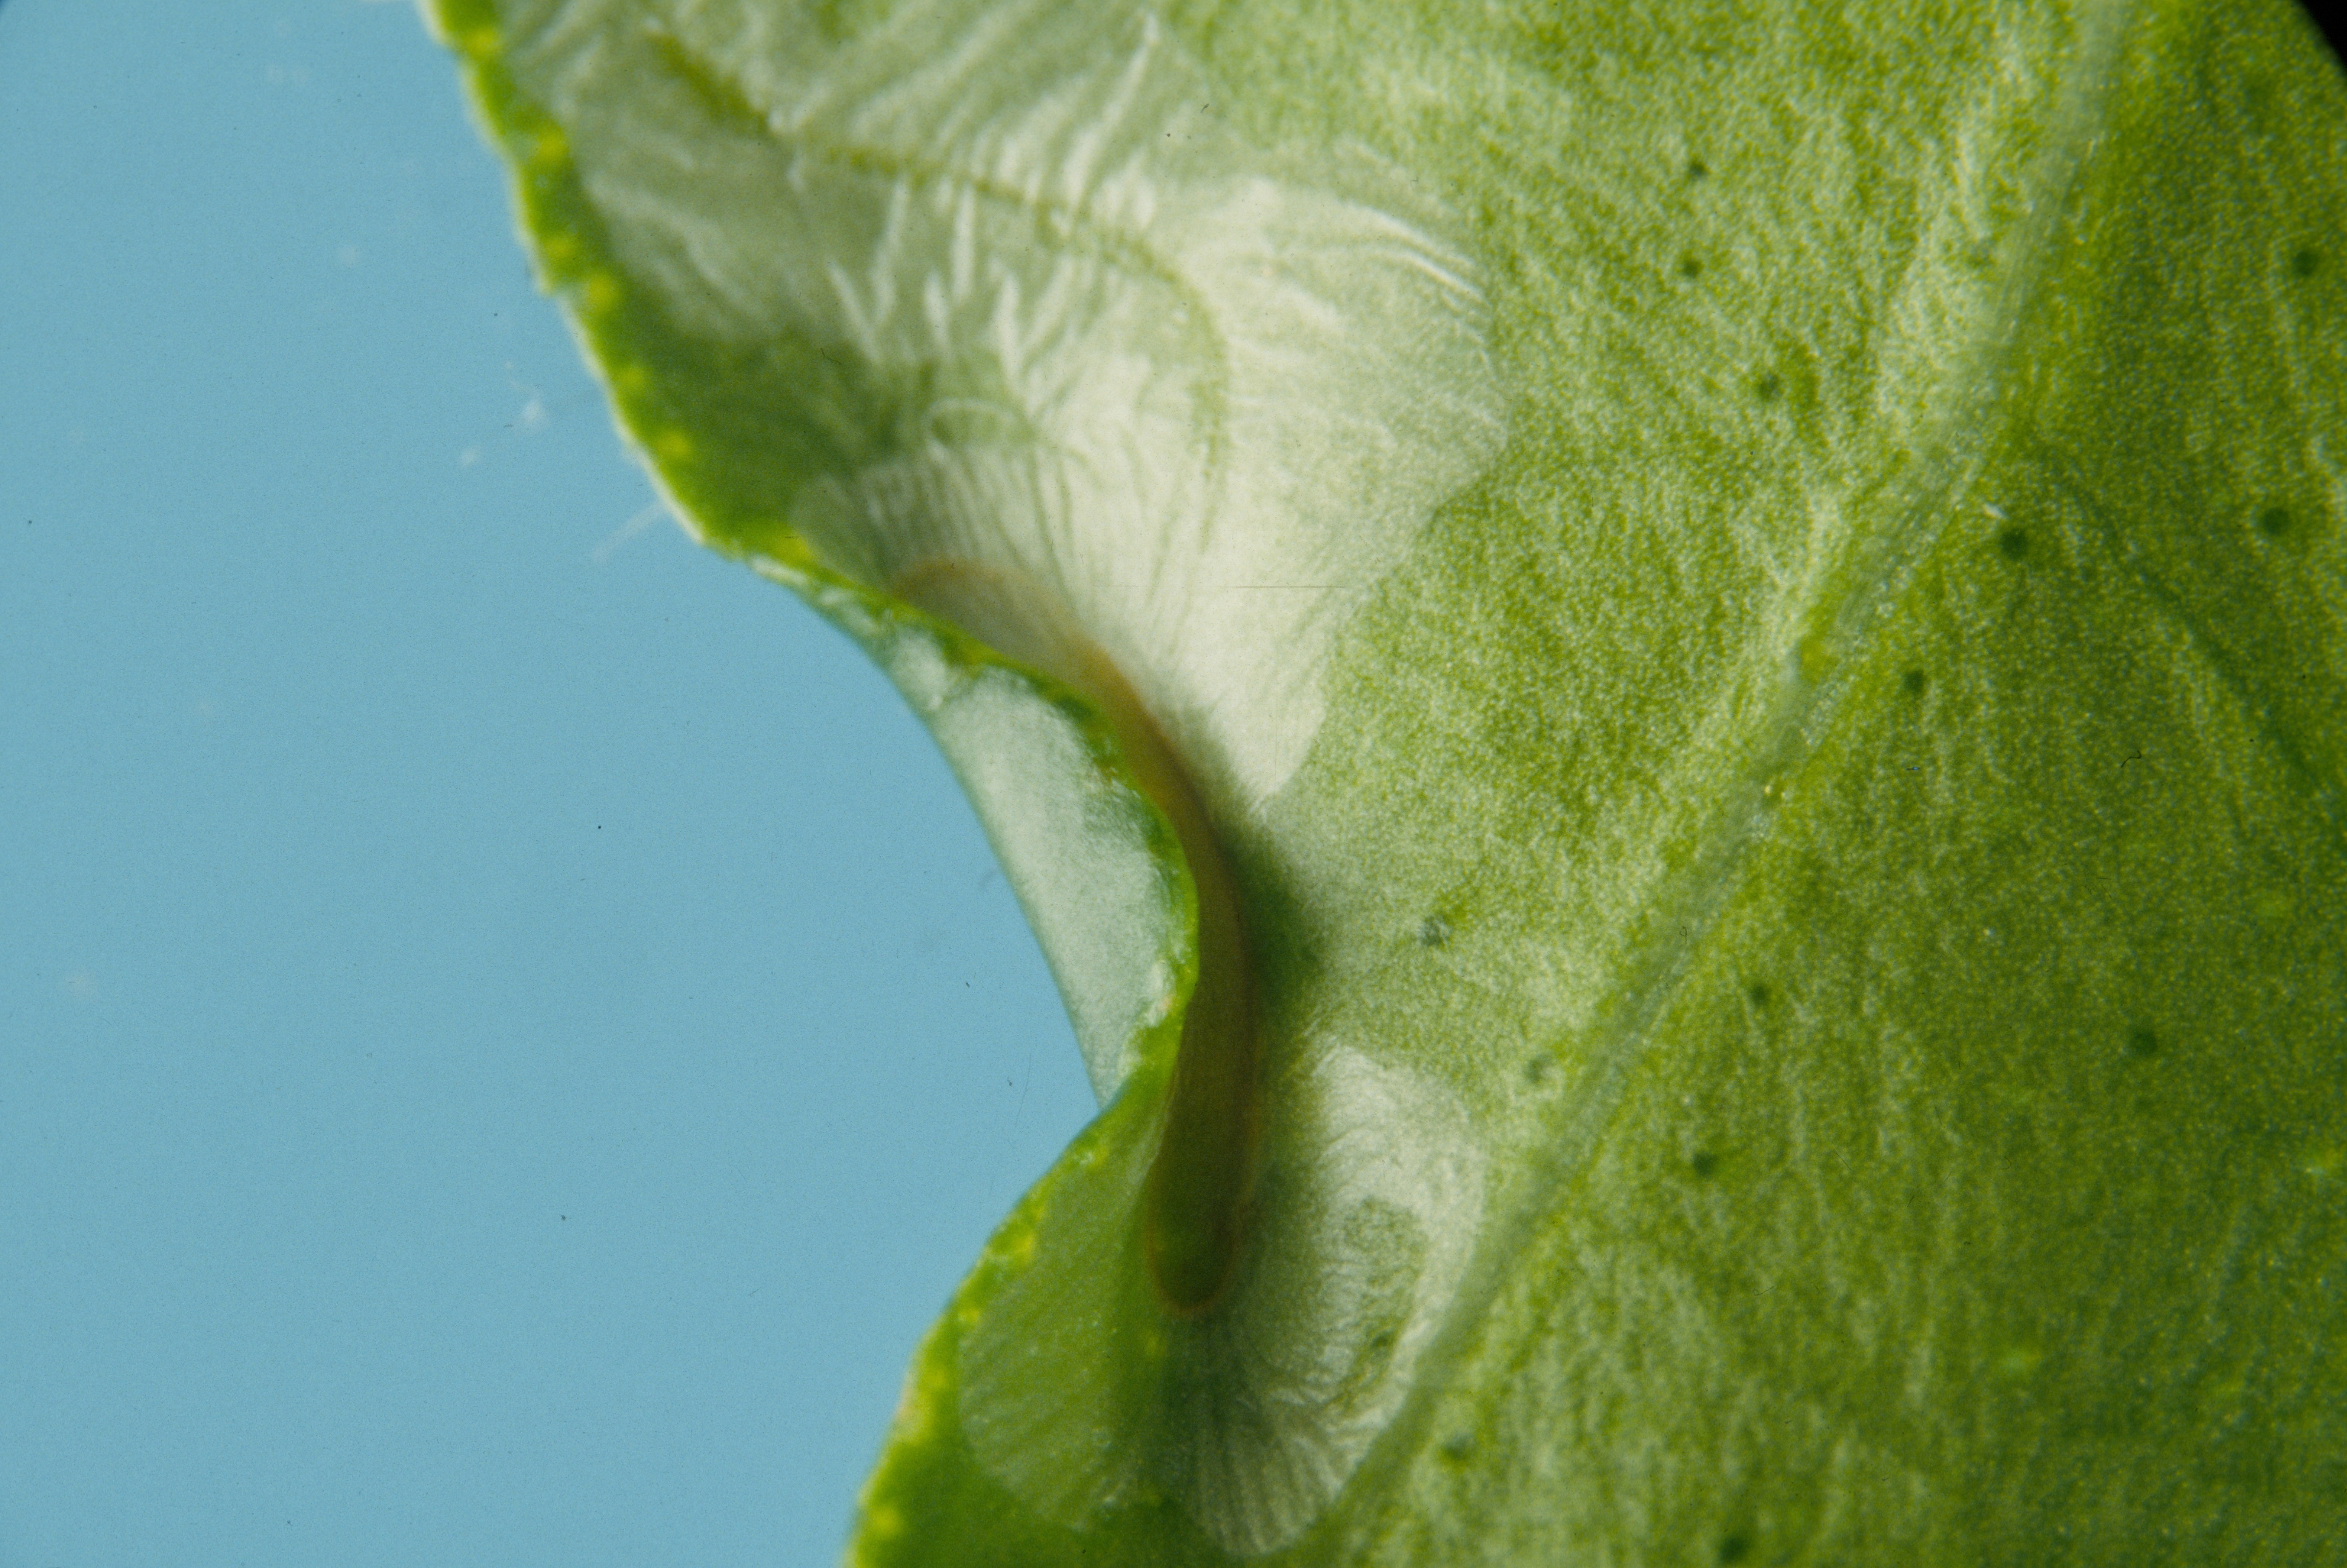 Figure 7. Citrus leaf miner (Phyllocnistis citrella) pupae in a rolled portion of leaf. Photo: JW Lotz, Florida Department of Agriculture and Consumer Services, Bugwood.org.